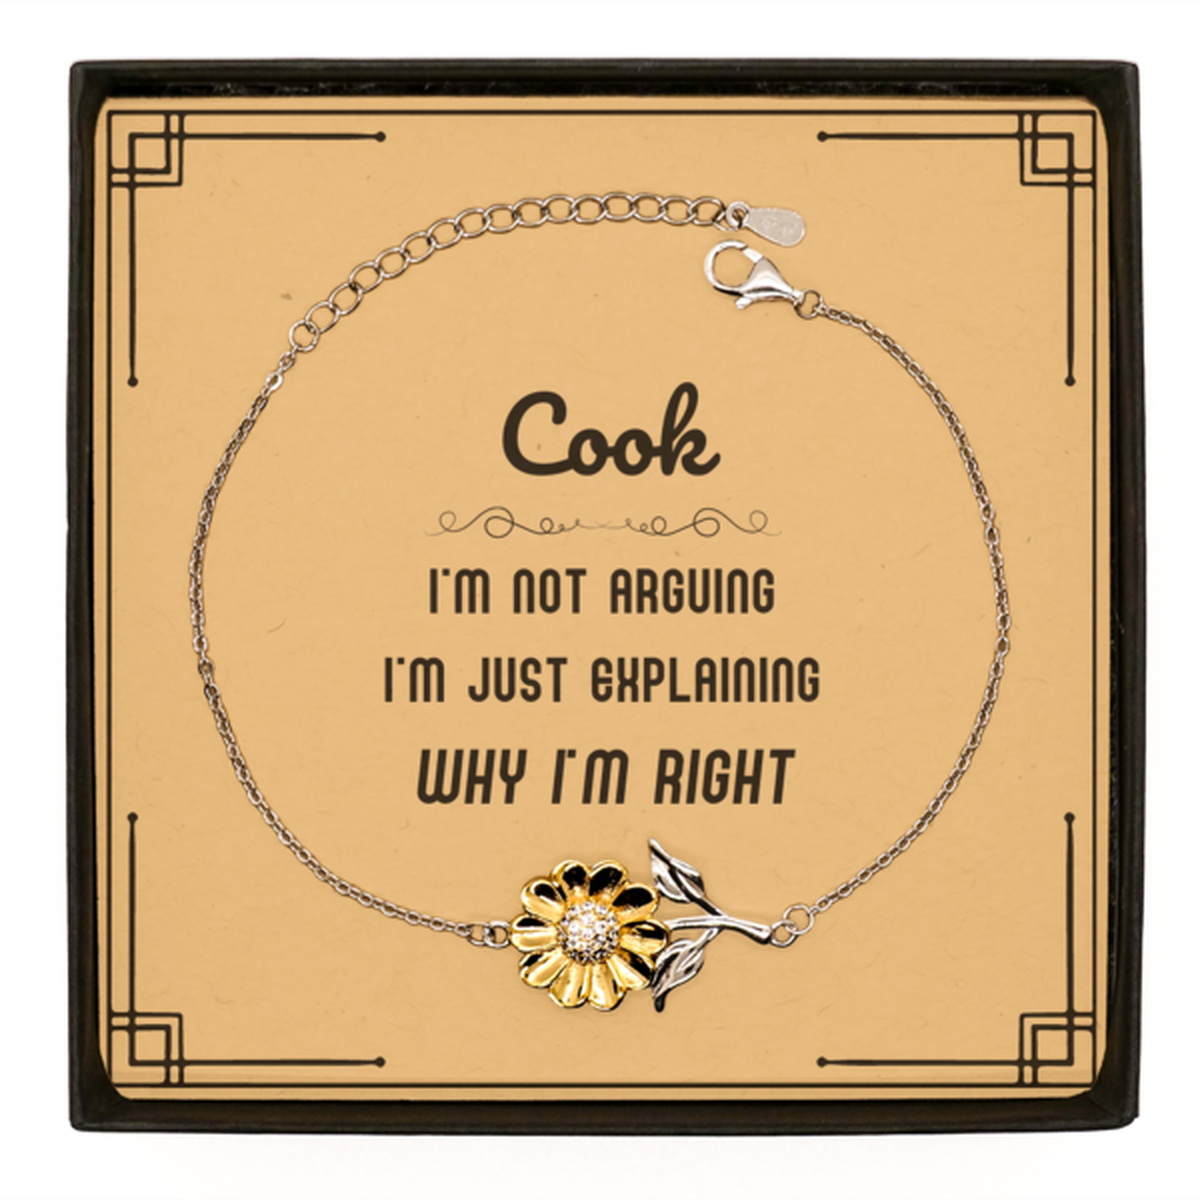 Cook I'm not Arguing. I'm Just Explaining Why I'm RIGHT Sunflower Bracelet, Funny Saying Quote Cook Gifts For Cook Message Card Graduation Birthday Christmas Gifts for Men Women Coworker